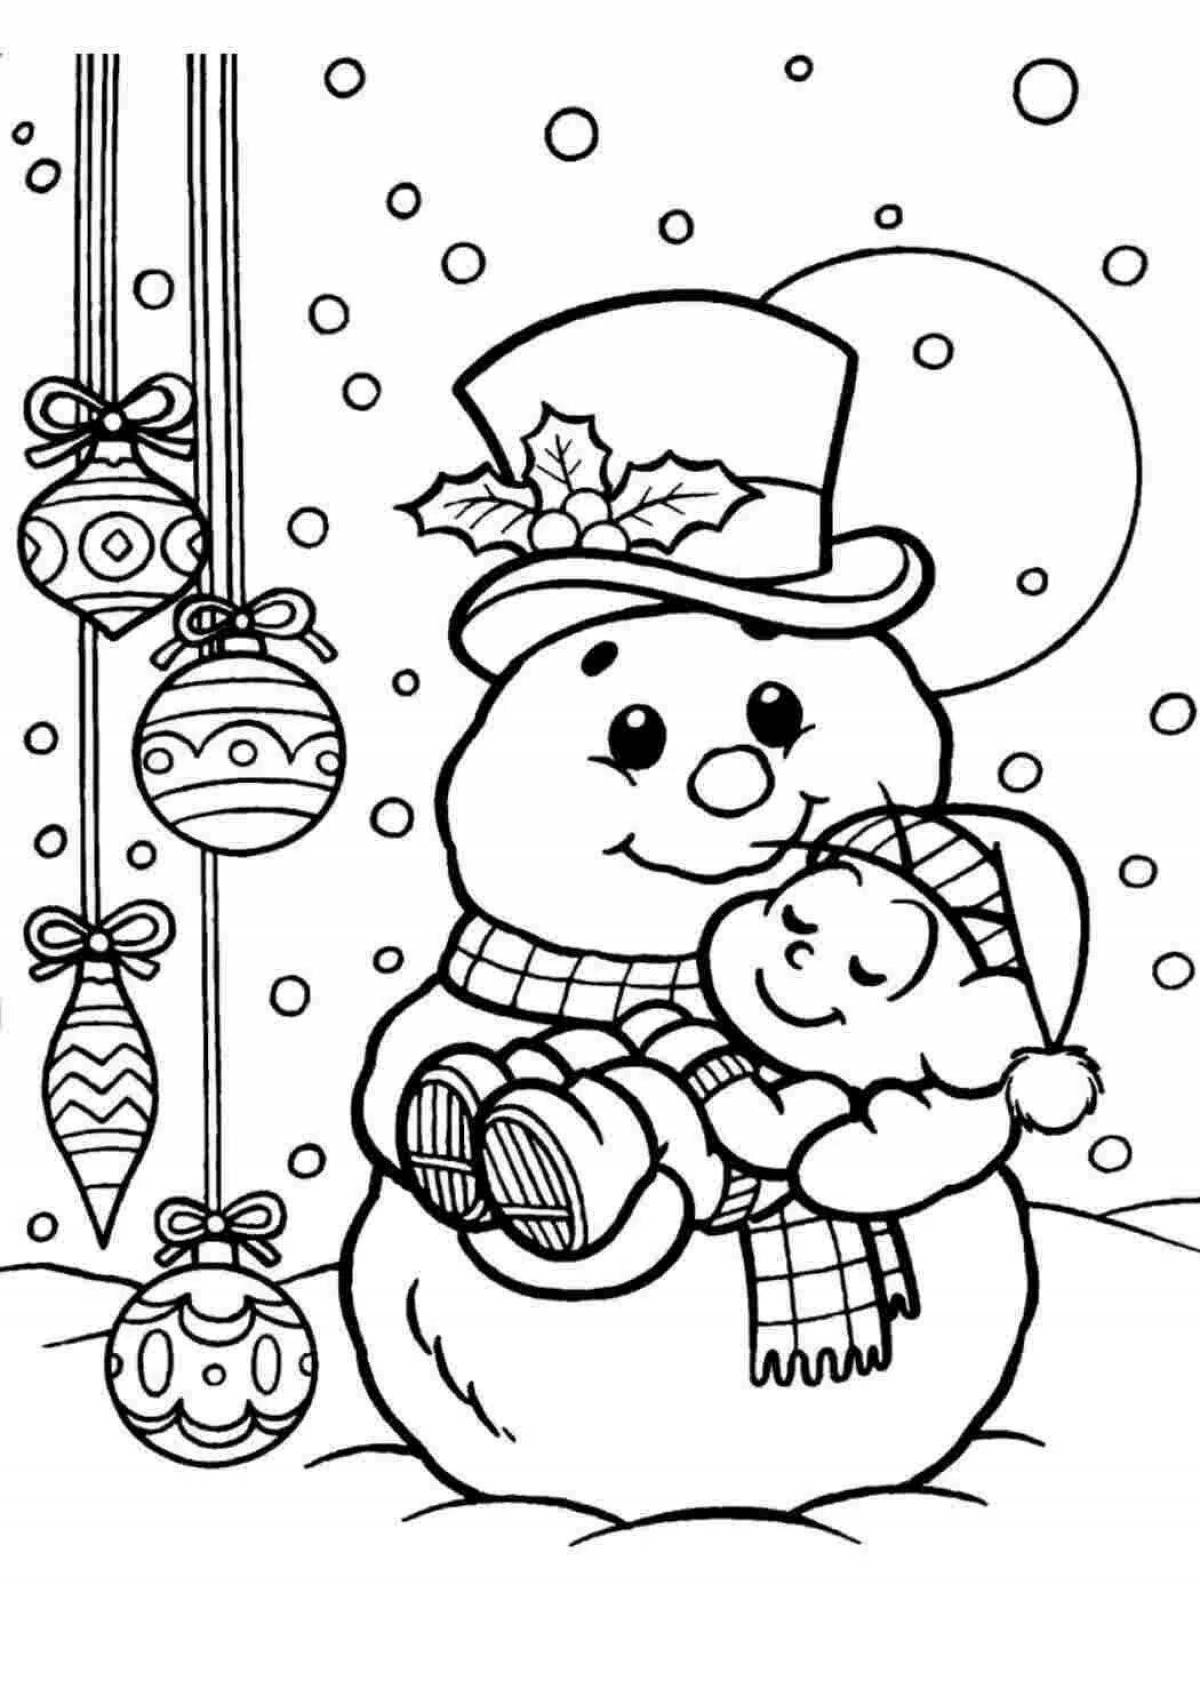 Funny snowman drawing for kids